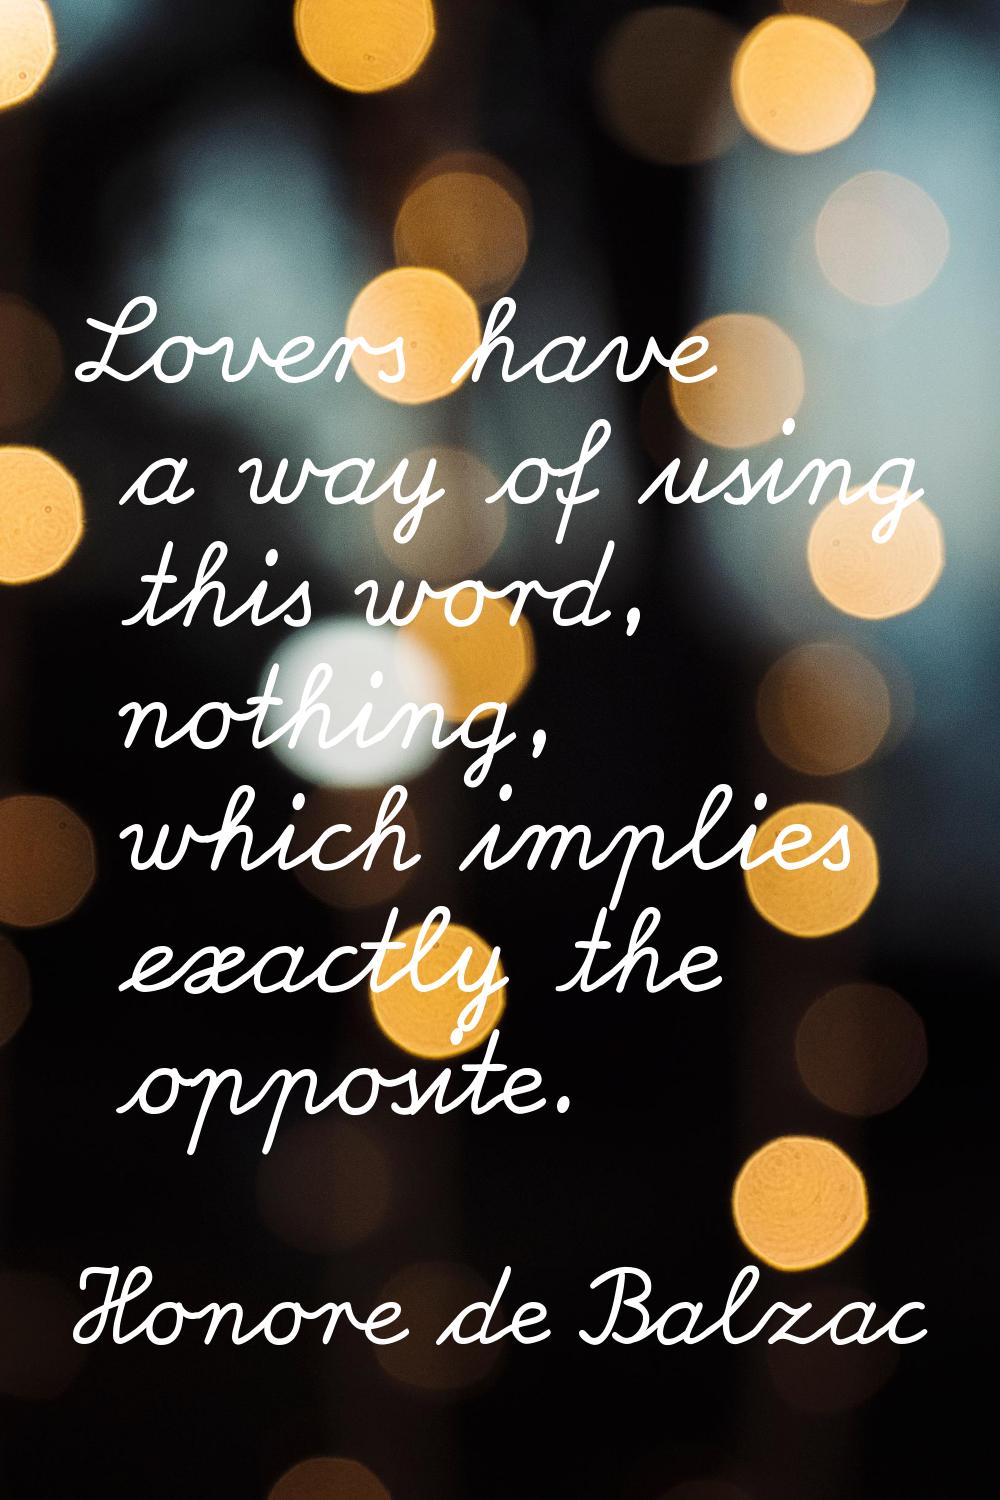 Lovers have a way of using this word, nothing, which implies exactly the opposite.